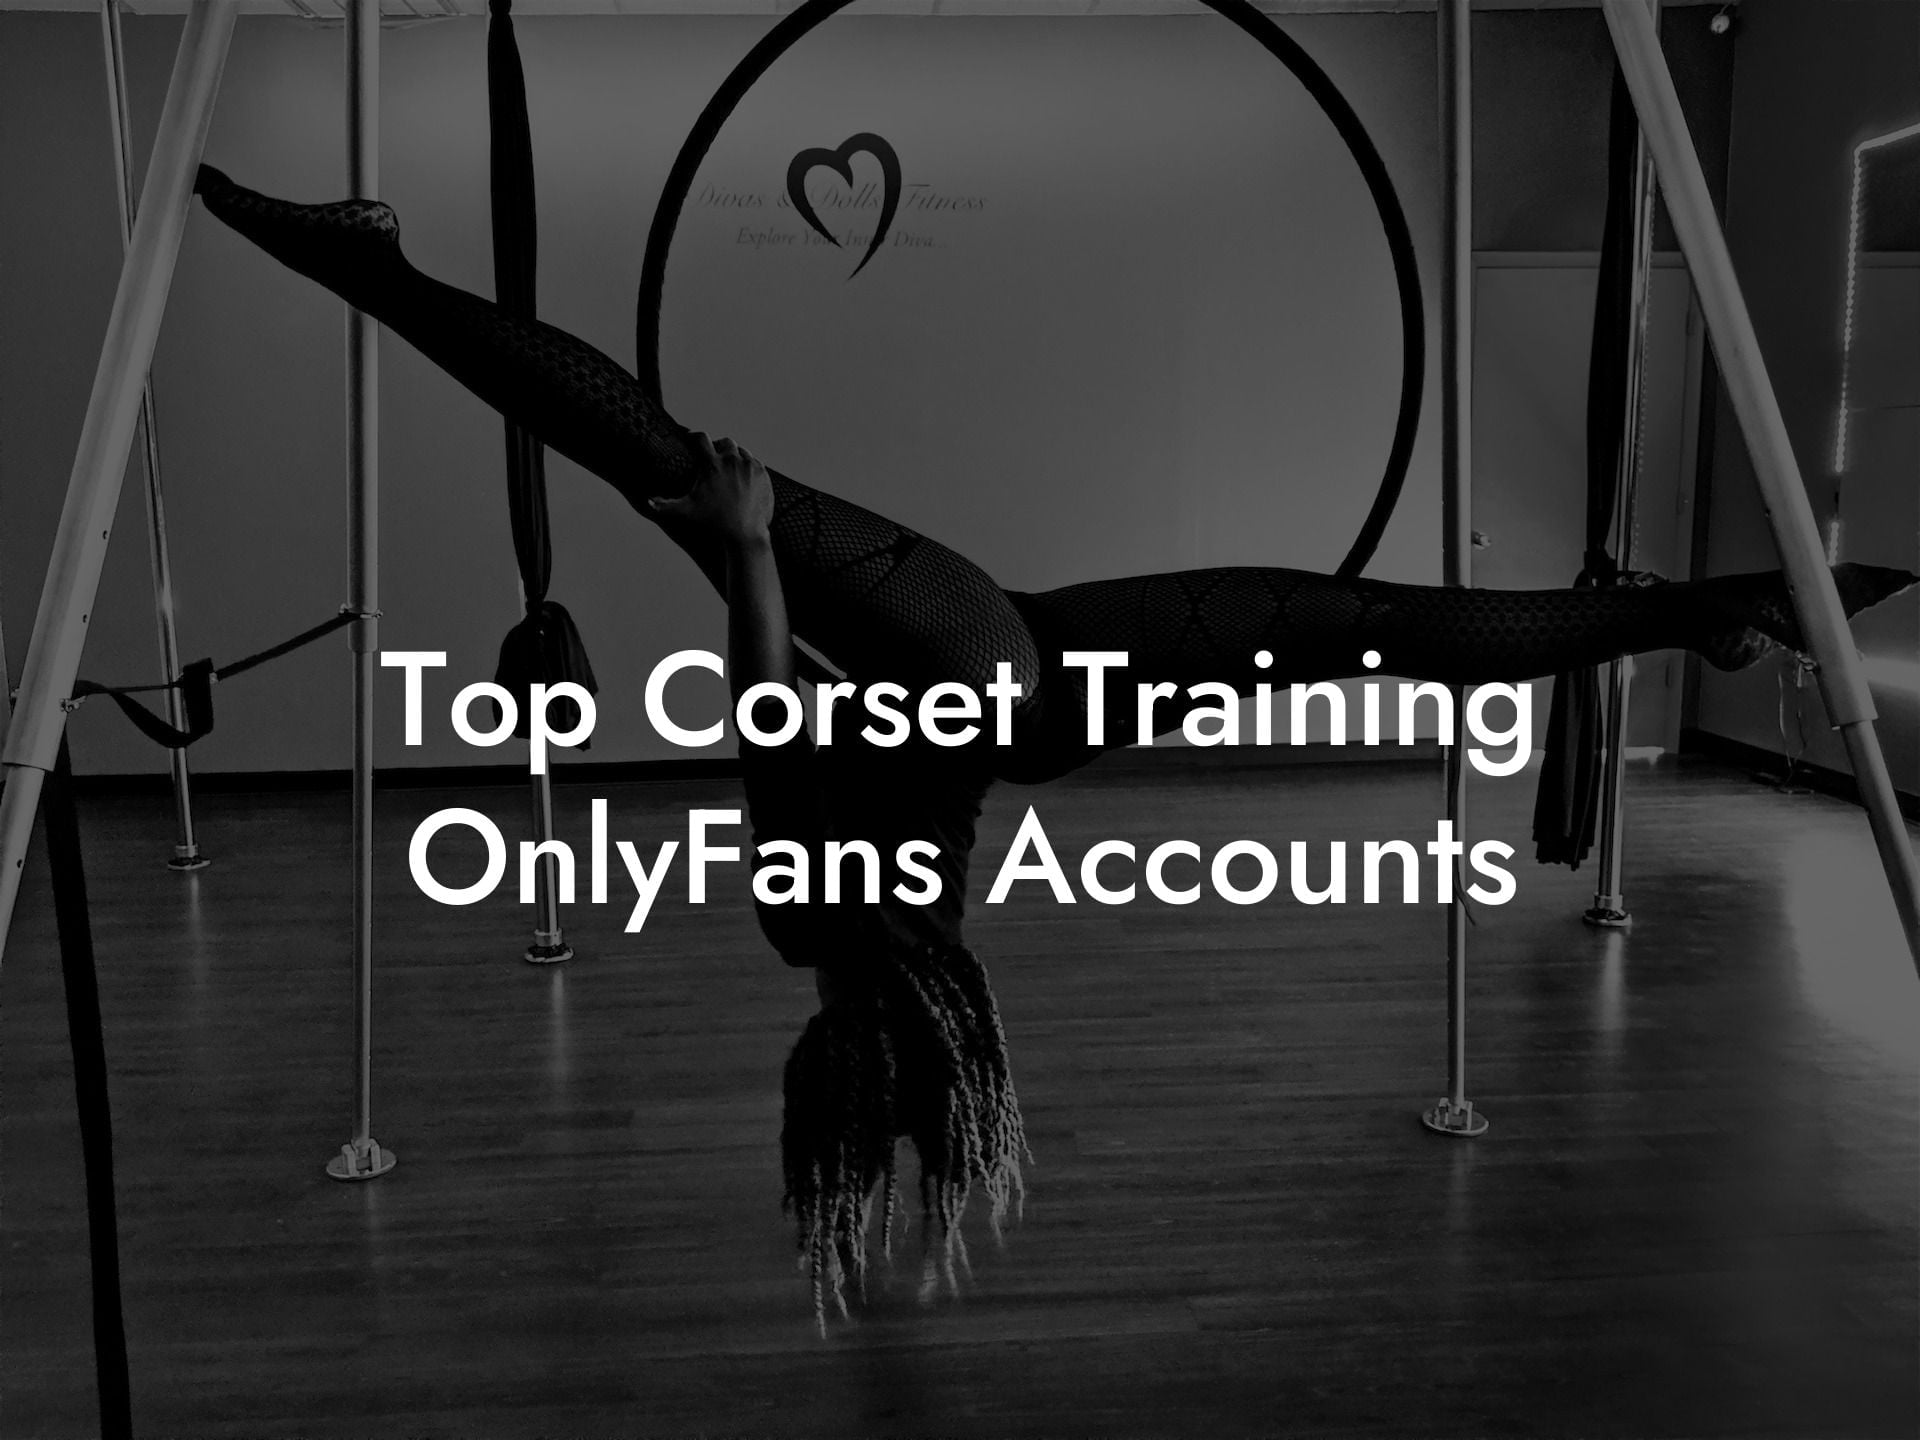 Top Corset Training OnlyFans Accounts